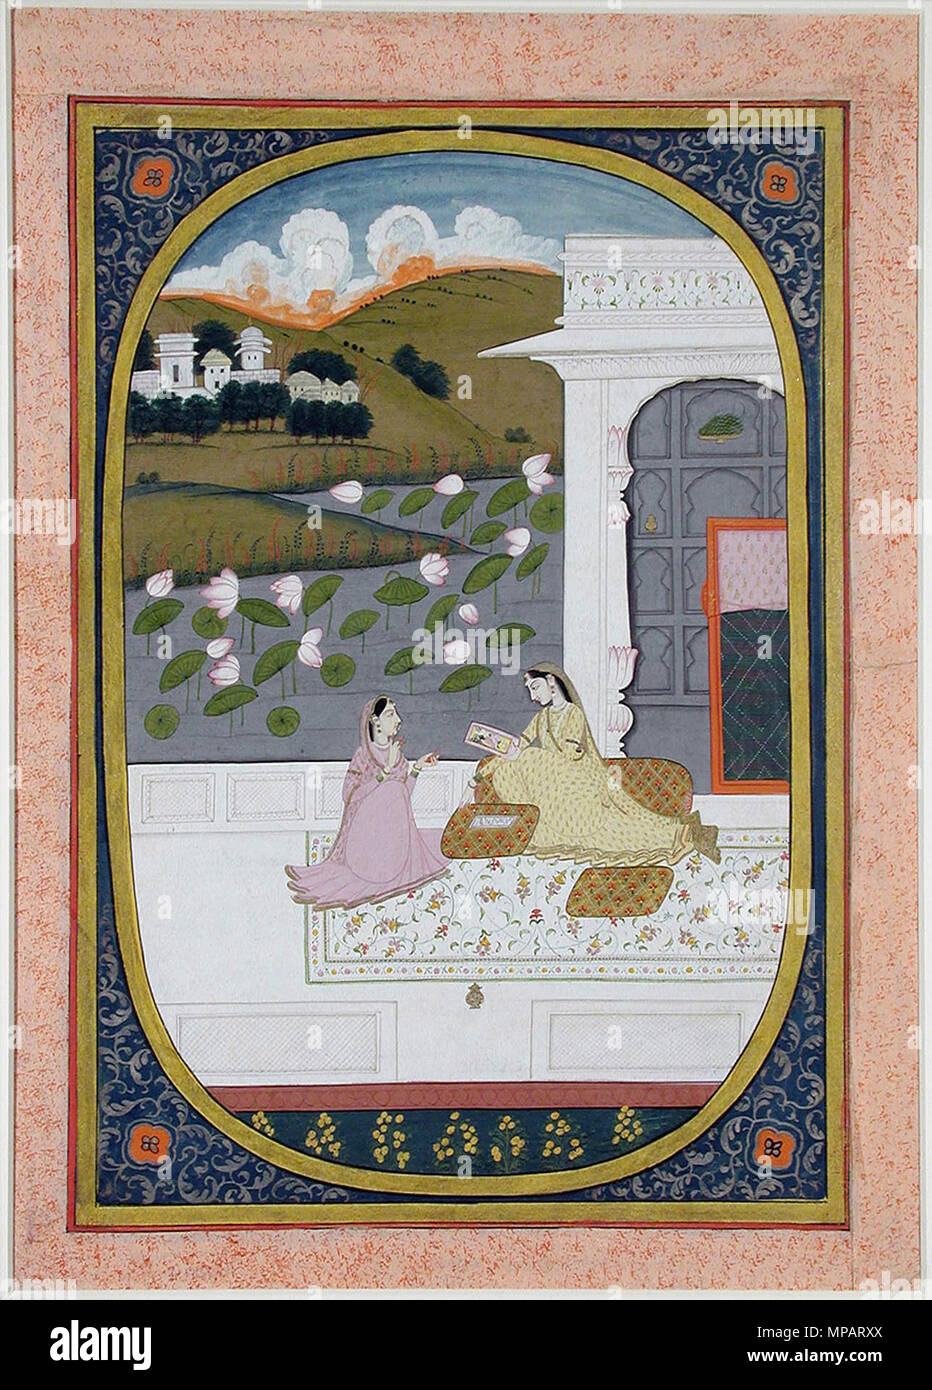 . English: Series Title: Connoisseur's Delight Suite Name: Raiskapriya Creation Date: ca. 1820 Display Dimensions: 13 5/16 in. x 9 11/16 in. (33.8 cm x 24.6 cm) Credit Line: Edwin Binney 3rd Collection Accession Number: 1990.1300 Collection: <a href='http://www.sdmart.org/art/our-collection/asian-art' rel='nofollow'>The San Diego Museum of Art</a> . 15 October 2001, 12:07:34. English: thesandiegomuseumofartcollection 1037 Radha looks at the picture of Krishna (6124593657) Stock Photo